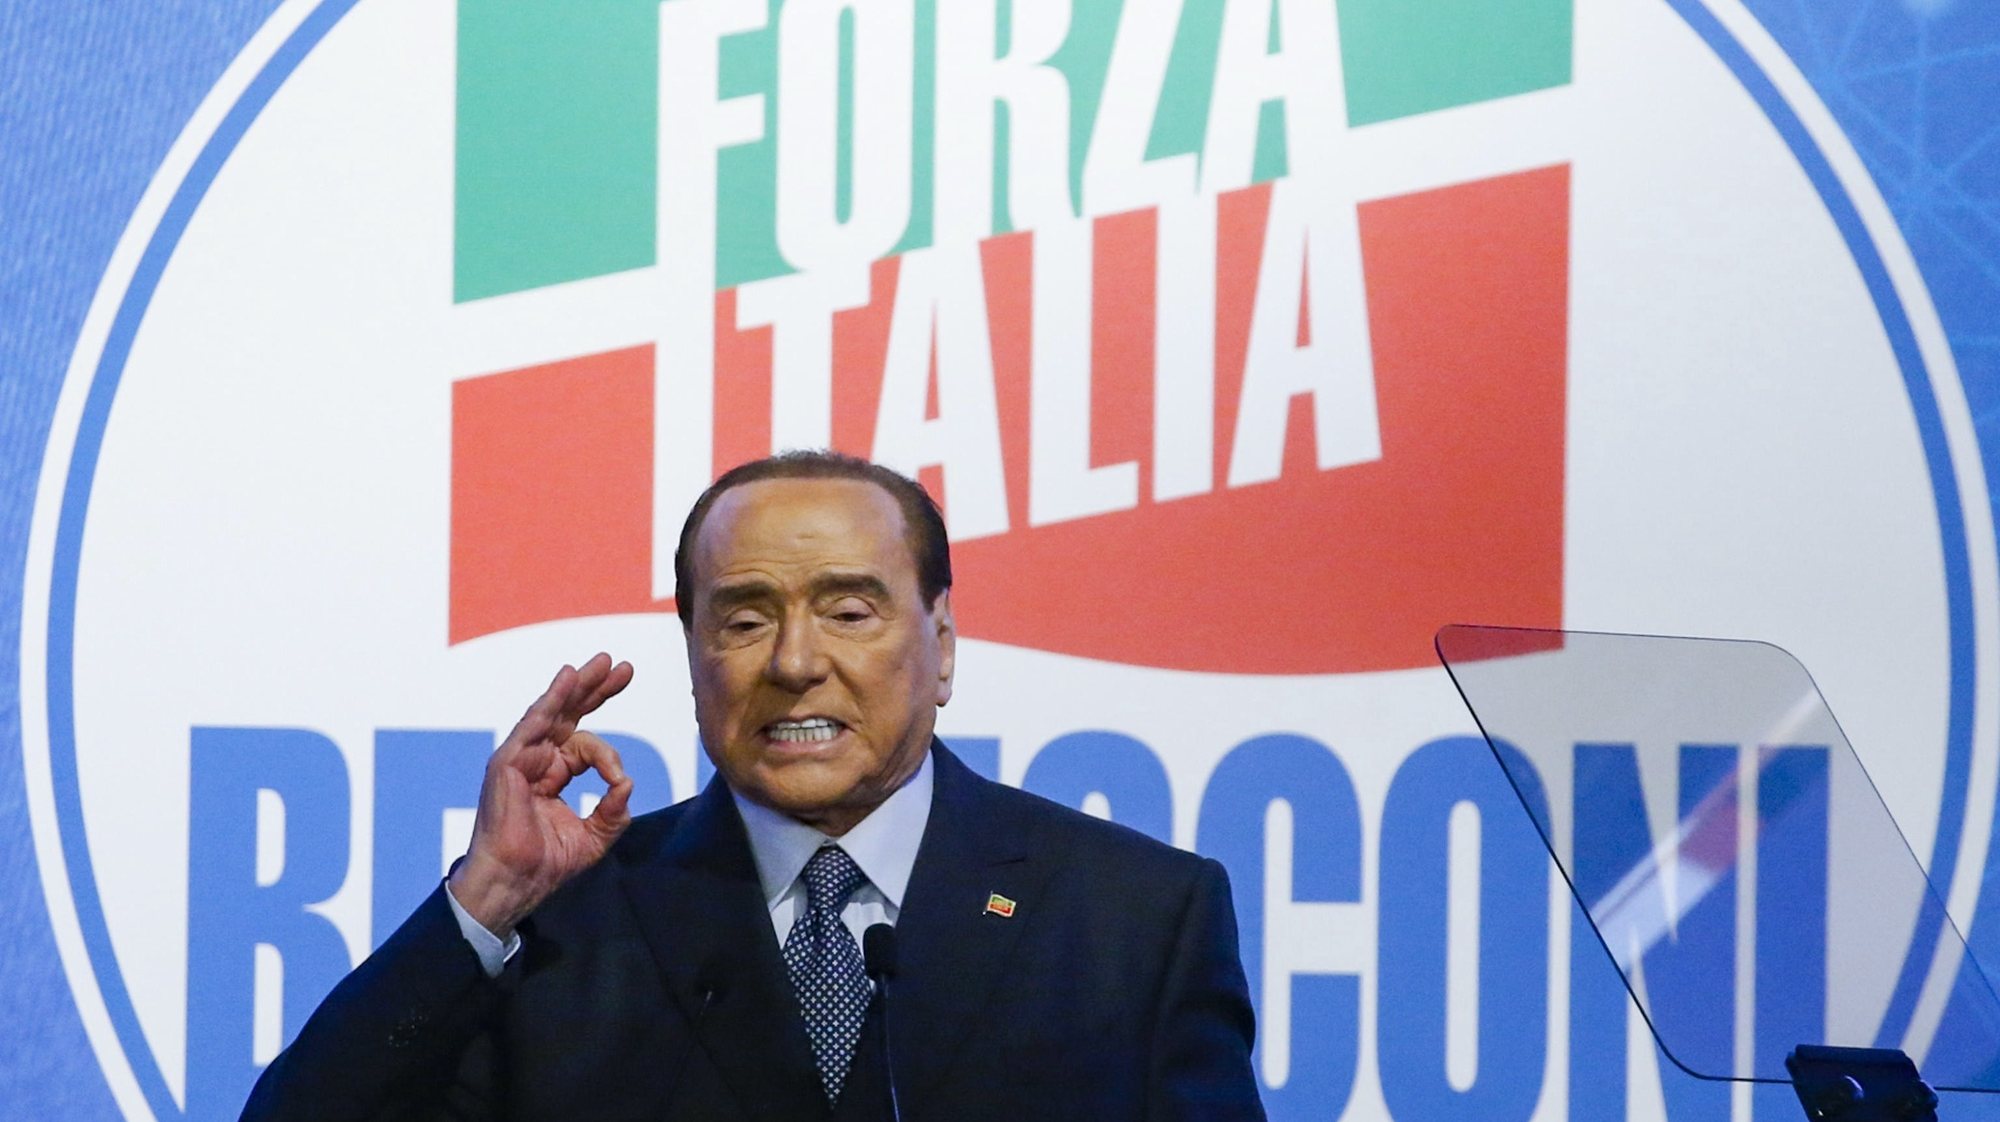 epa09880834 Former Italian Prime Minister and leader of the Forza Italia party Silvio Berlusconi speaks during a meeting with supporters at a rally in Rome, Italy, 09 April 2022.  EPA/FABIO FRUSTACI